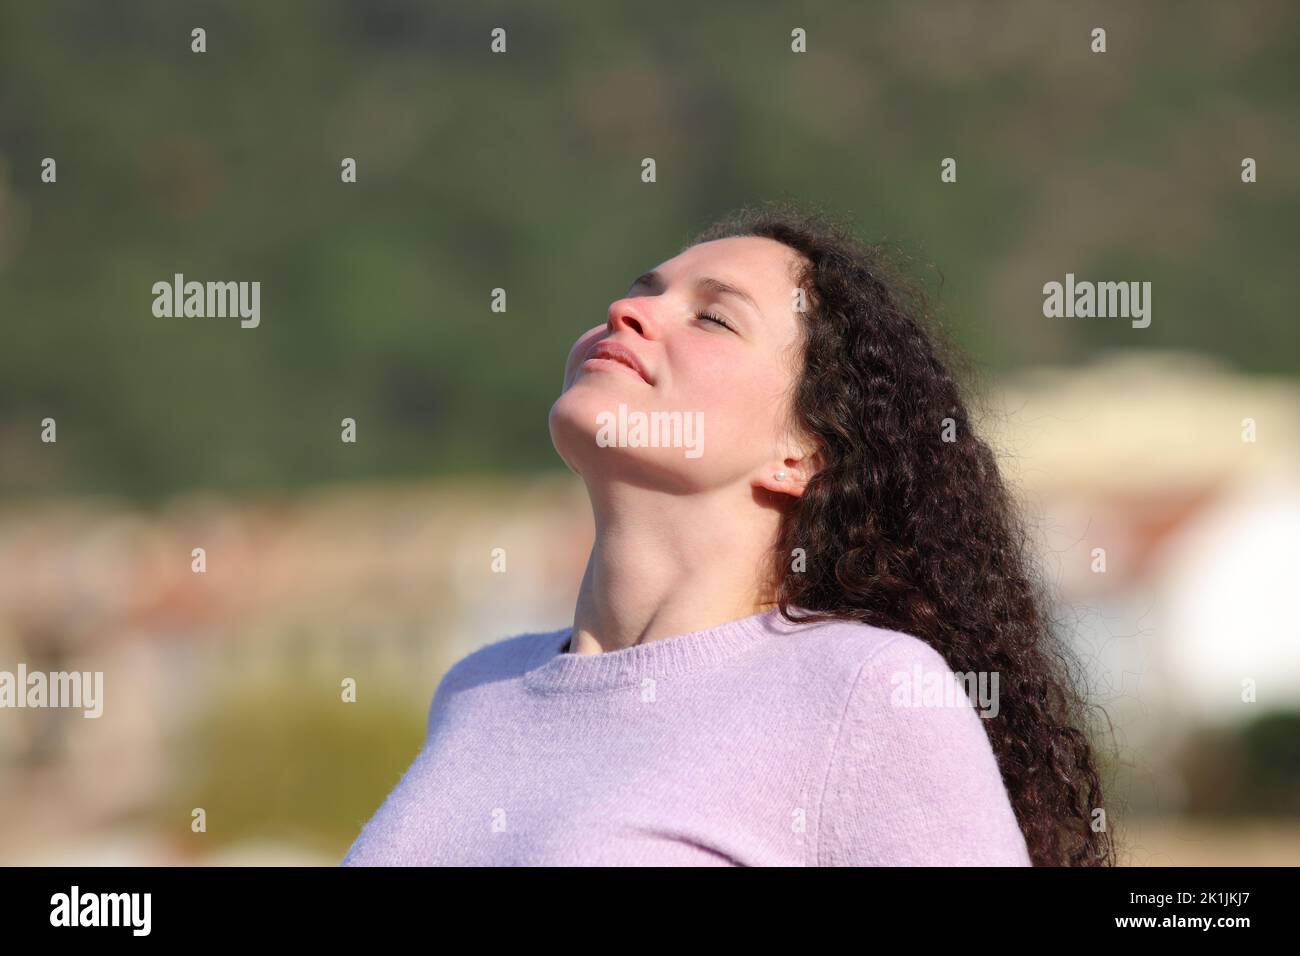 Woman with curly hair breathing fresh air in a town Stock Photo